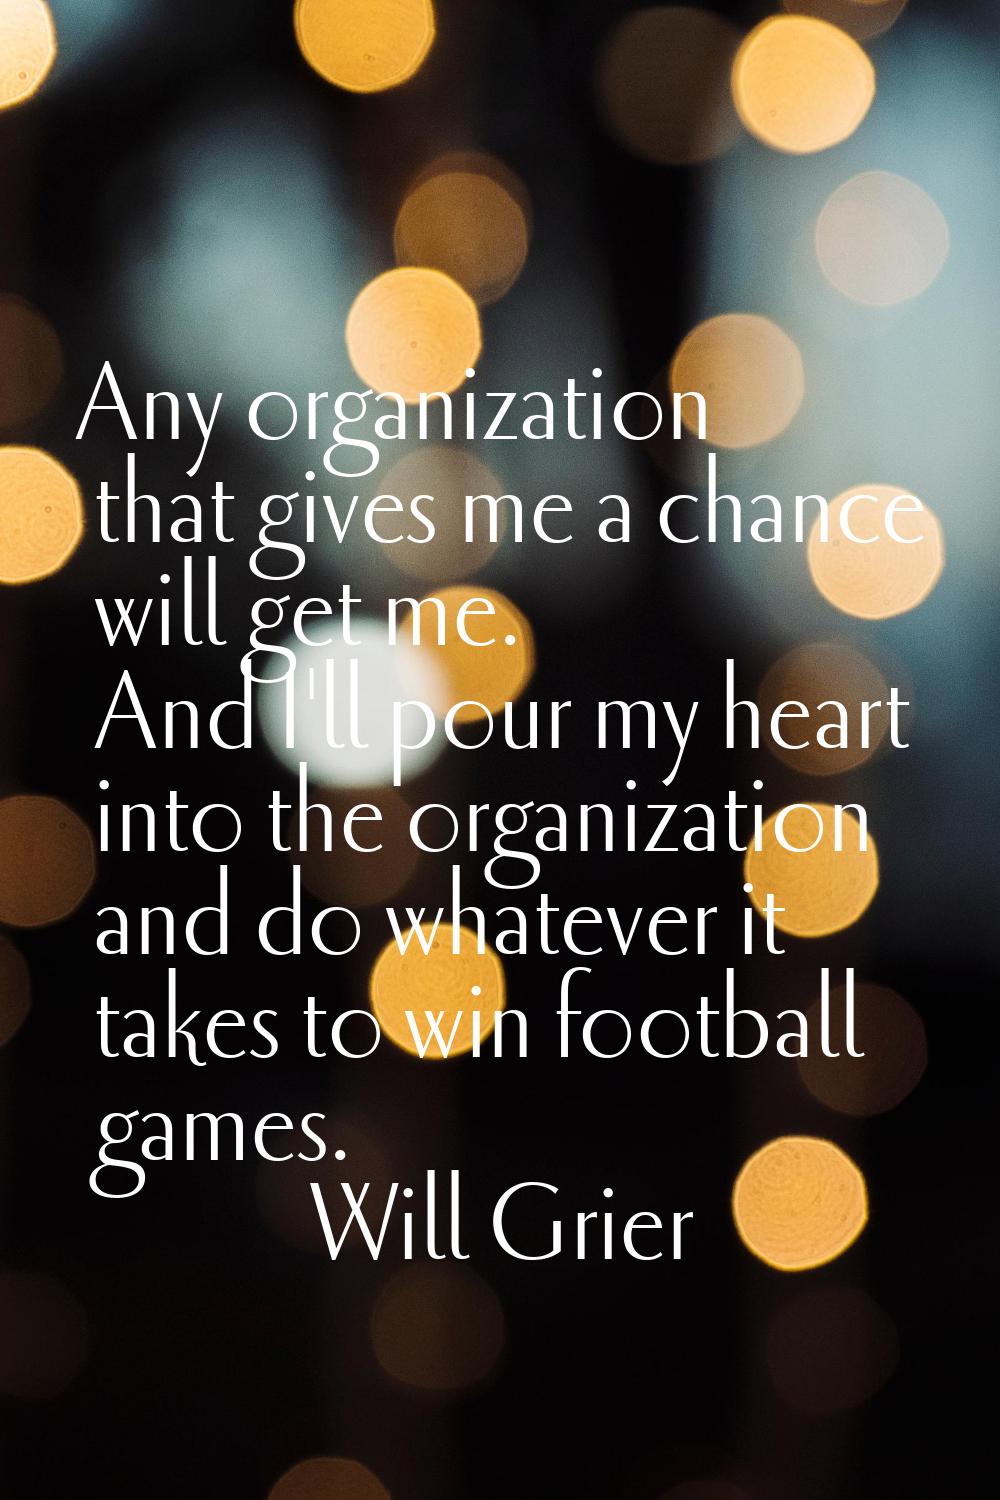 Any organization that gives me a chance will get me. And I'll pour my heart into the organization a